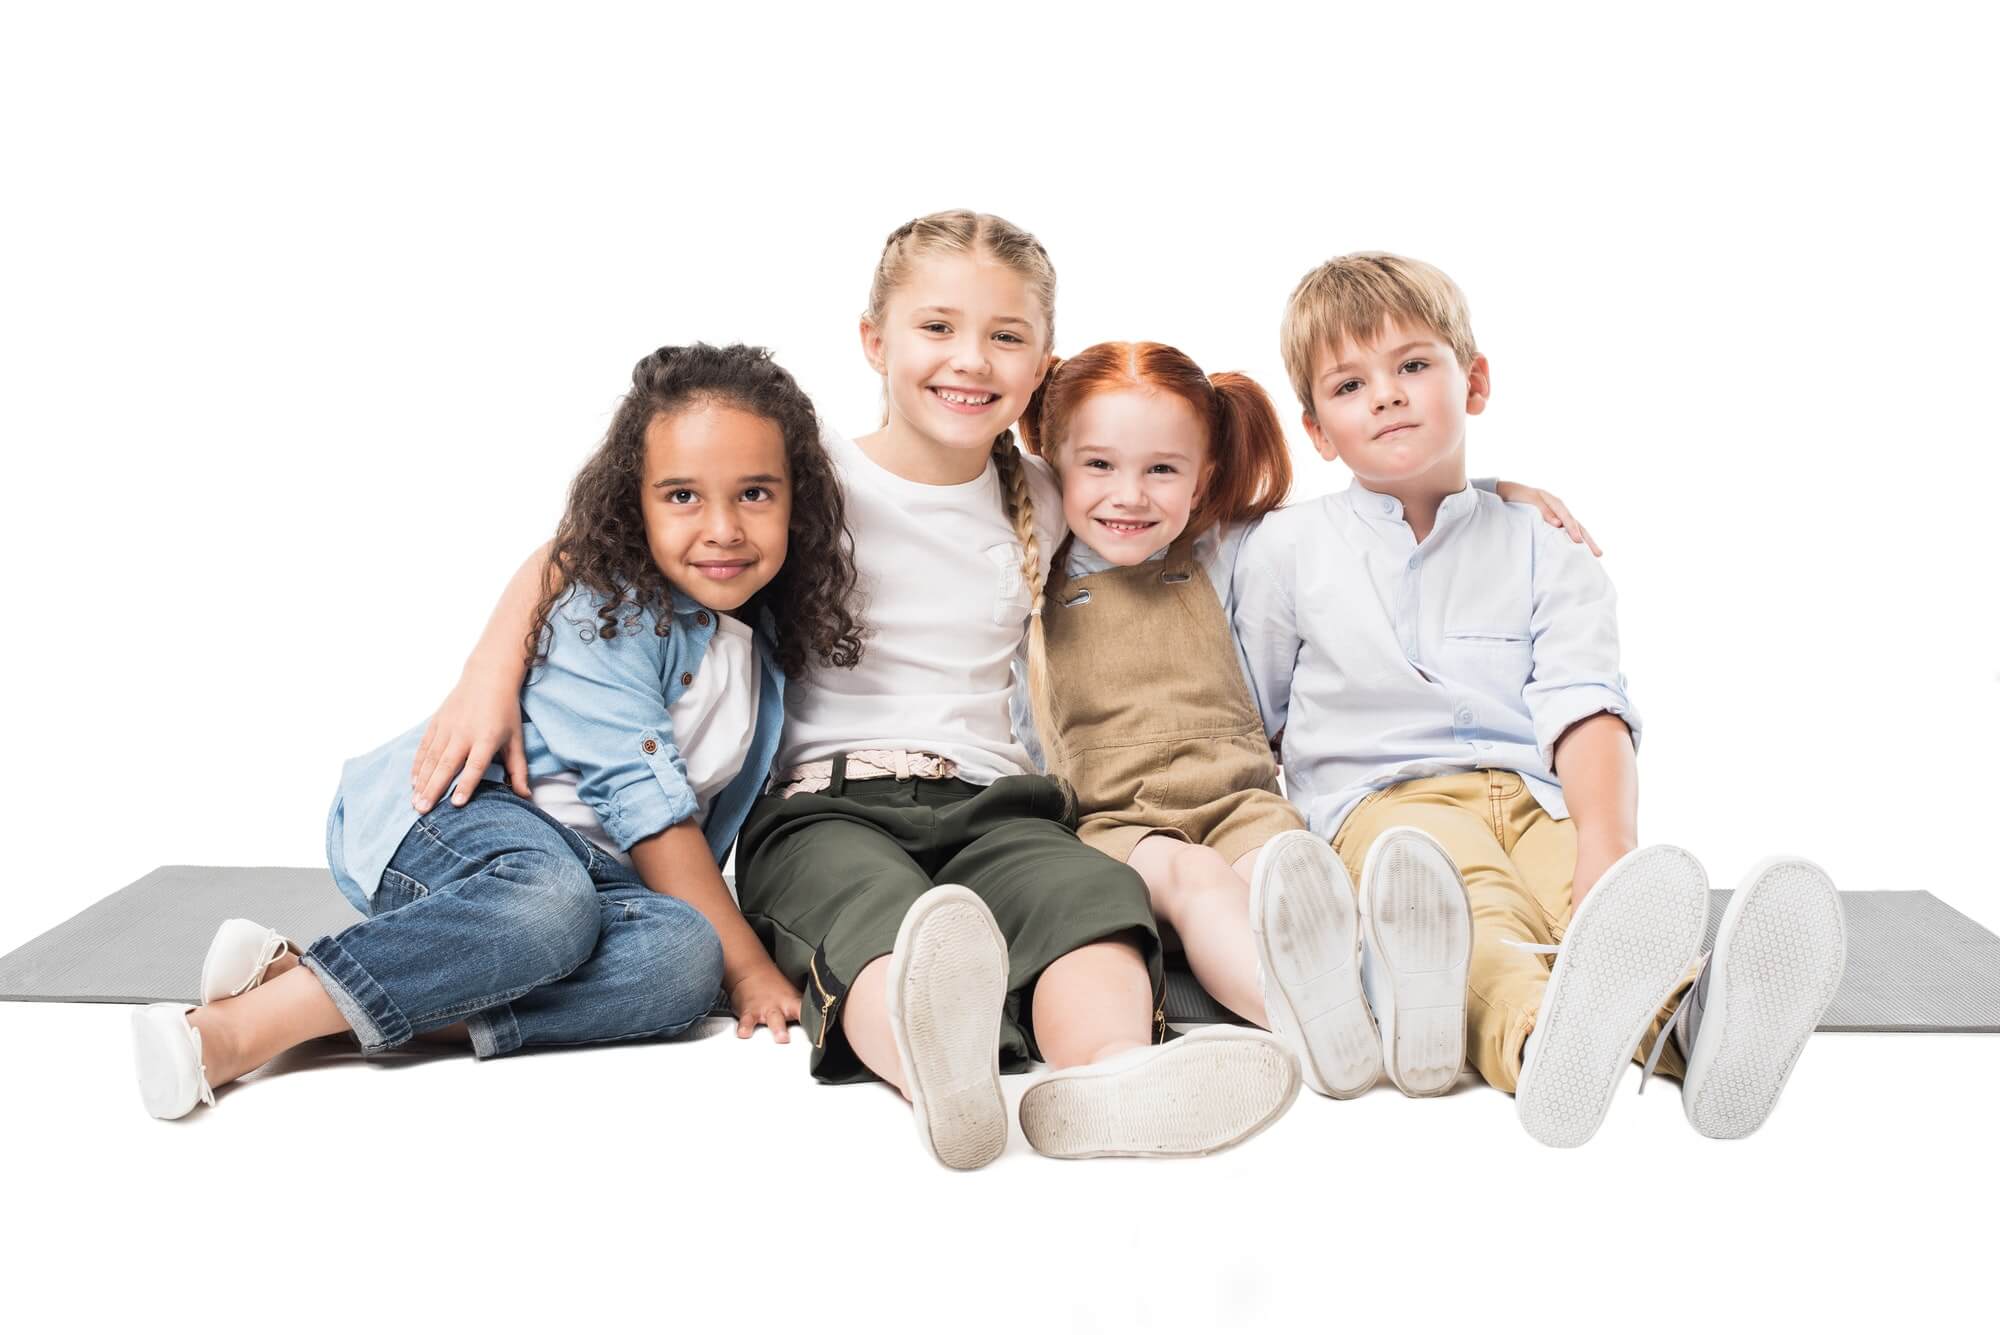 happy-multiethnic-children-sitting-together-isolated-on-white.jpg